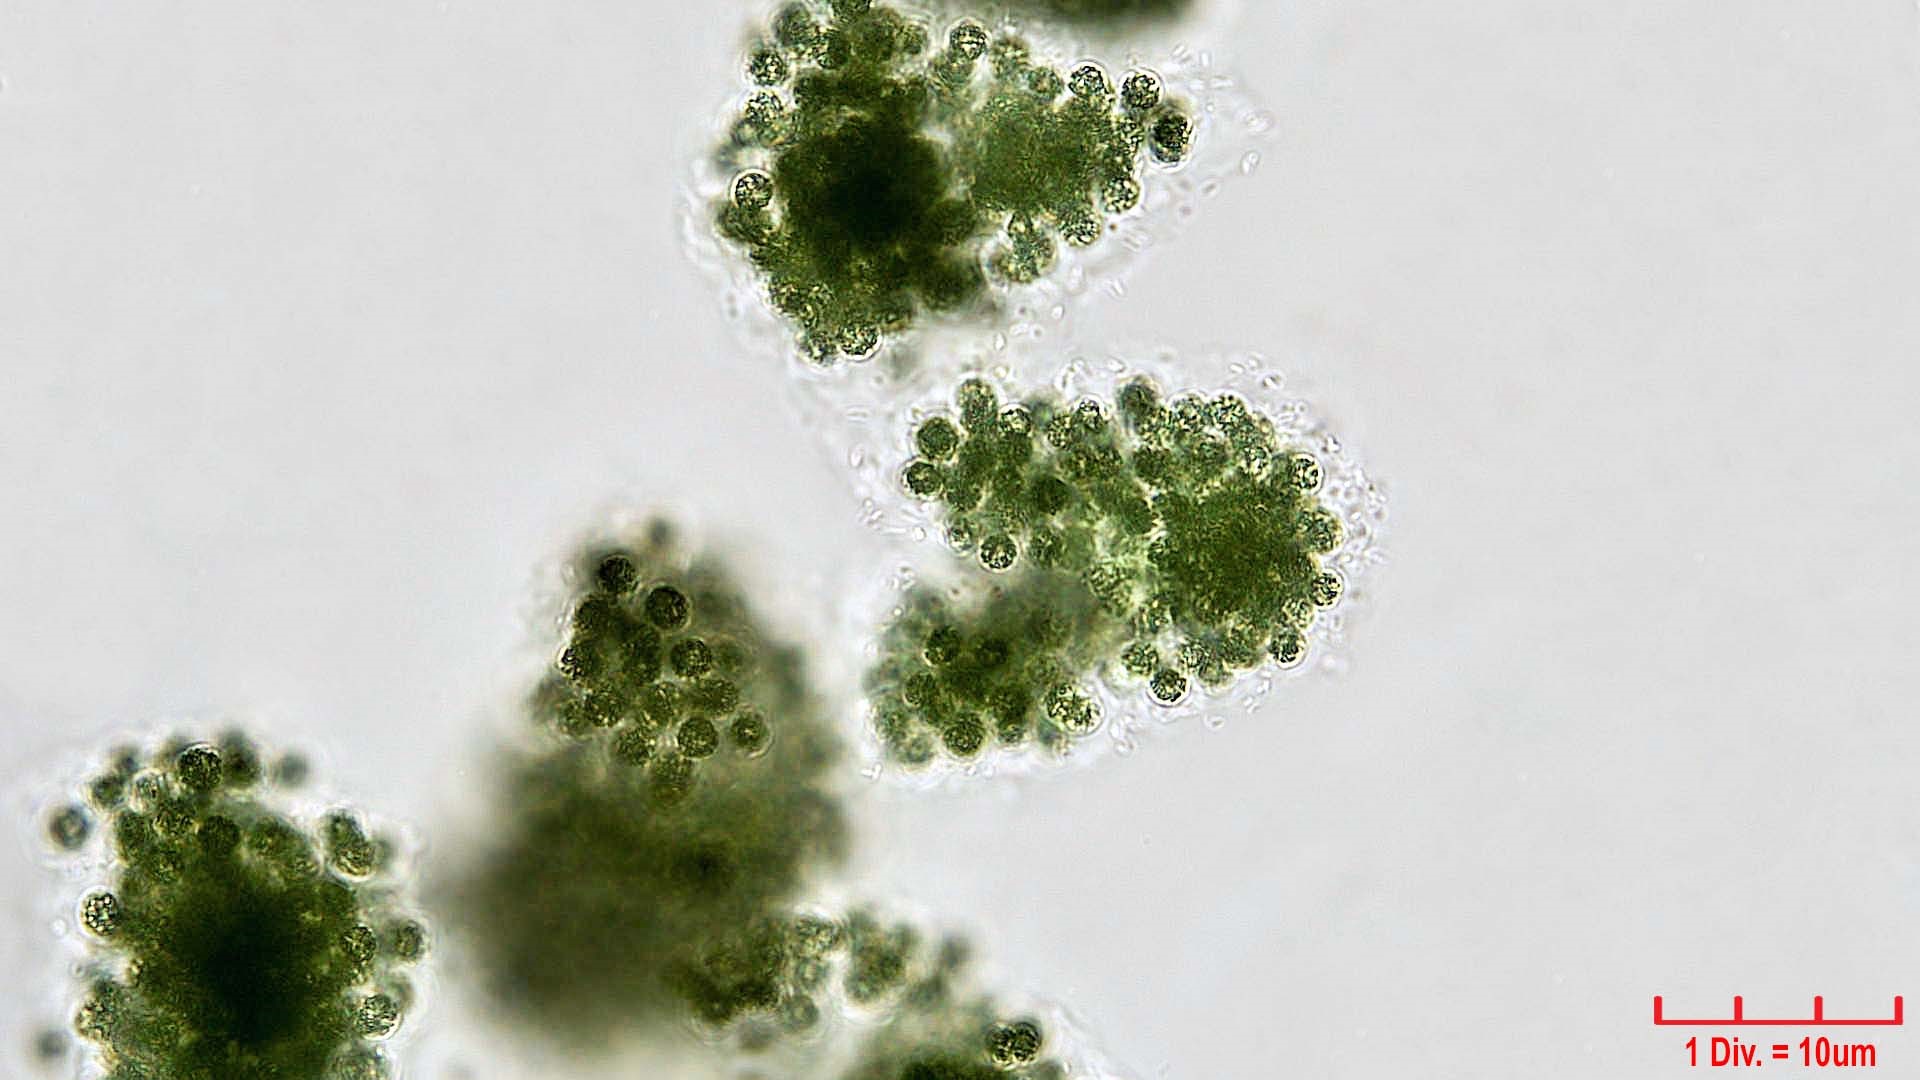 Cyanobacteria/Chroococcales/Microcystaceae/Microcystis/viridis/microcystis-viridis-66.jpg